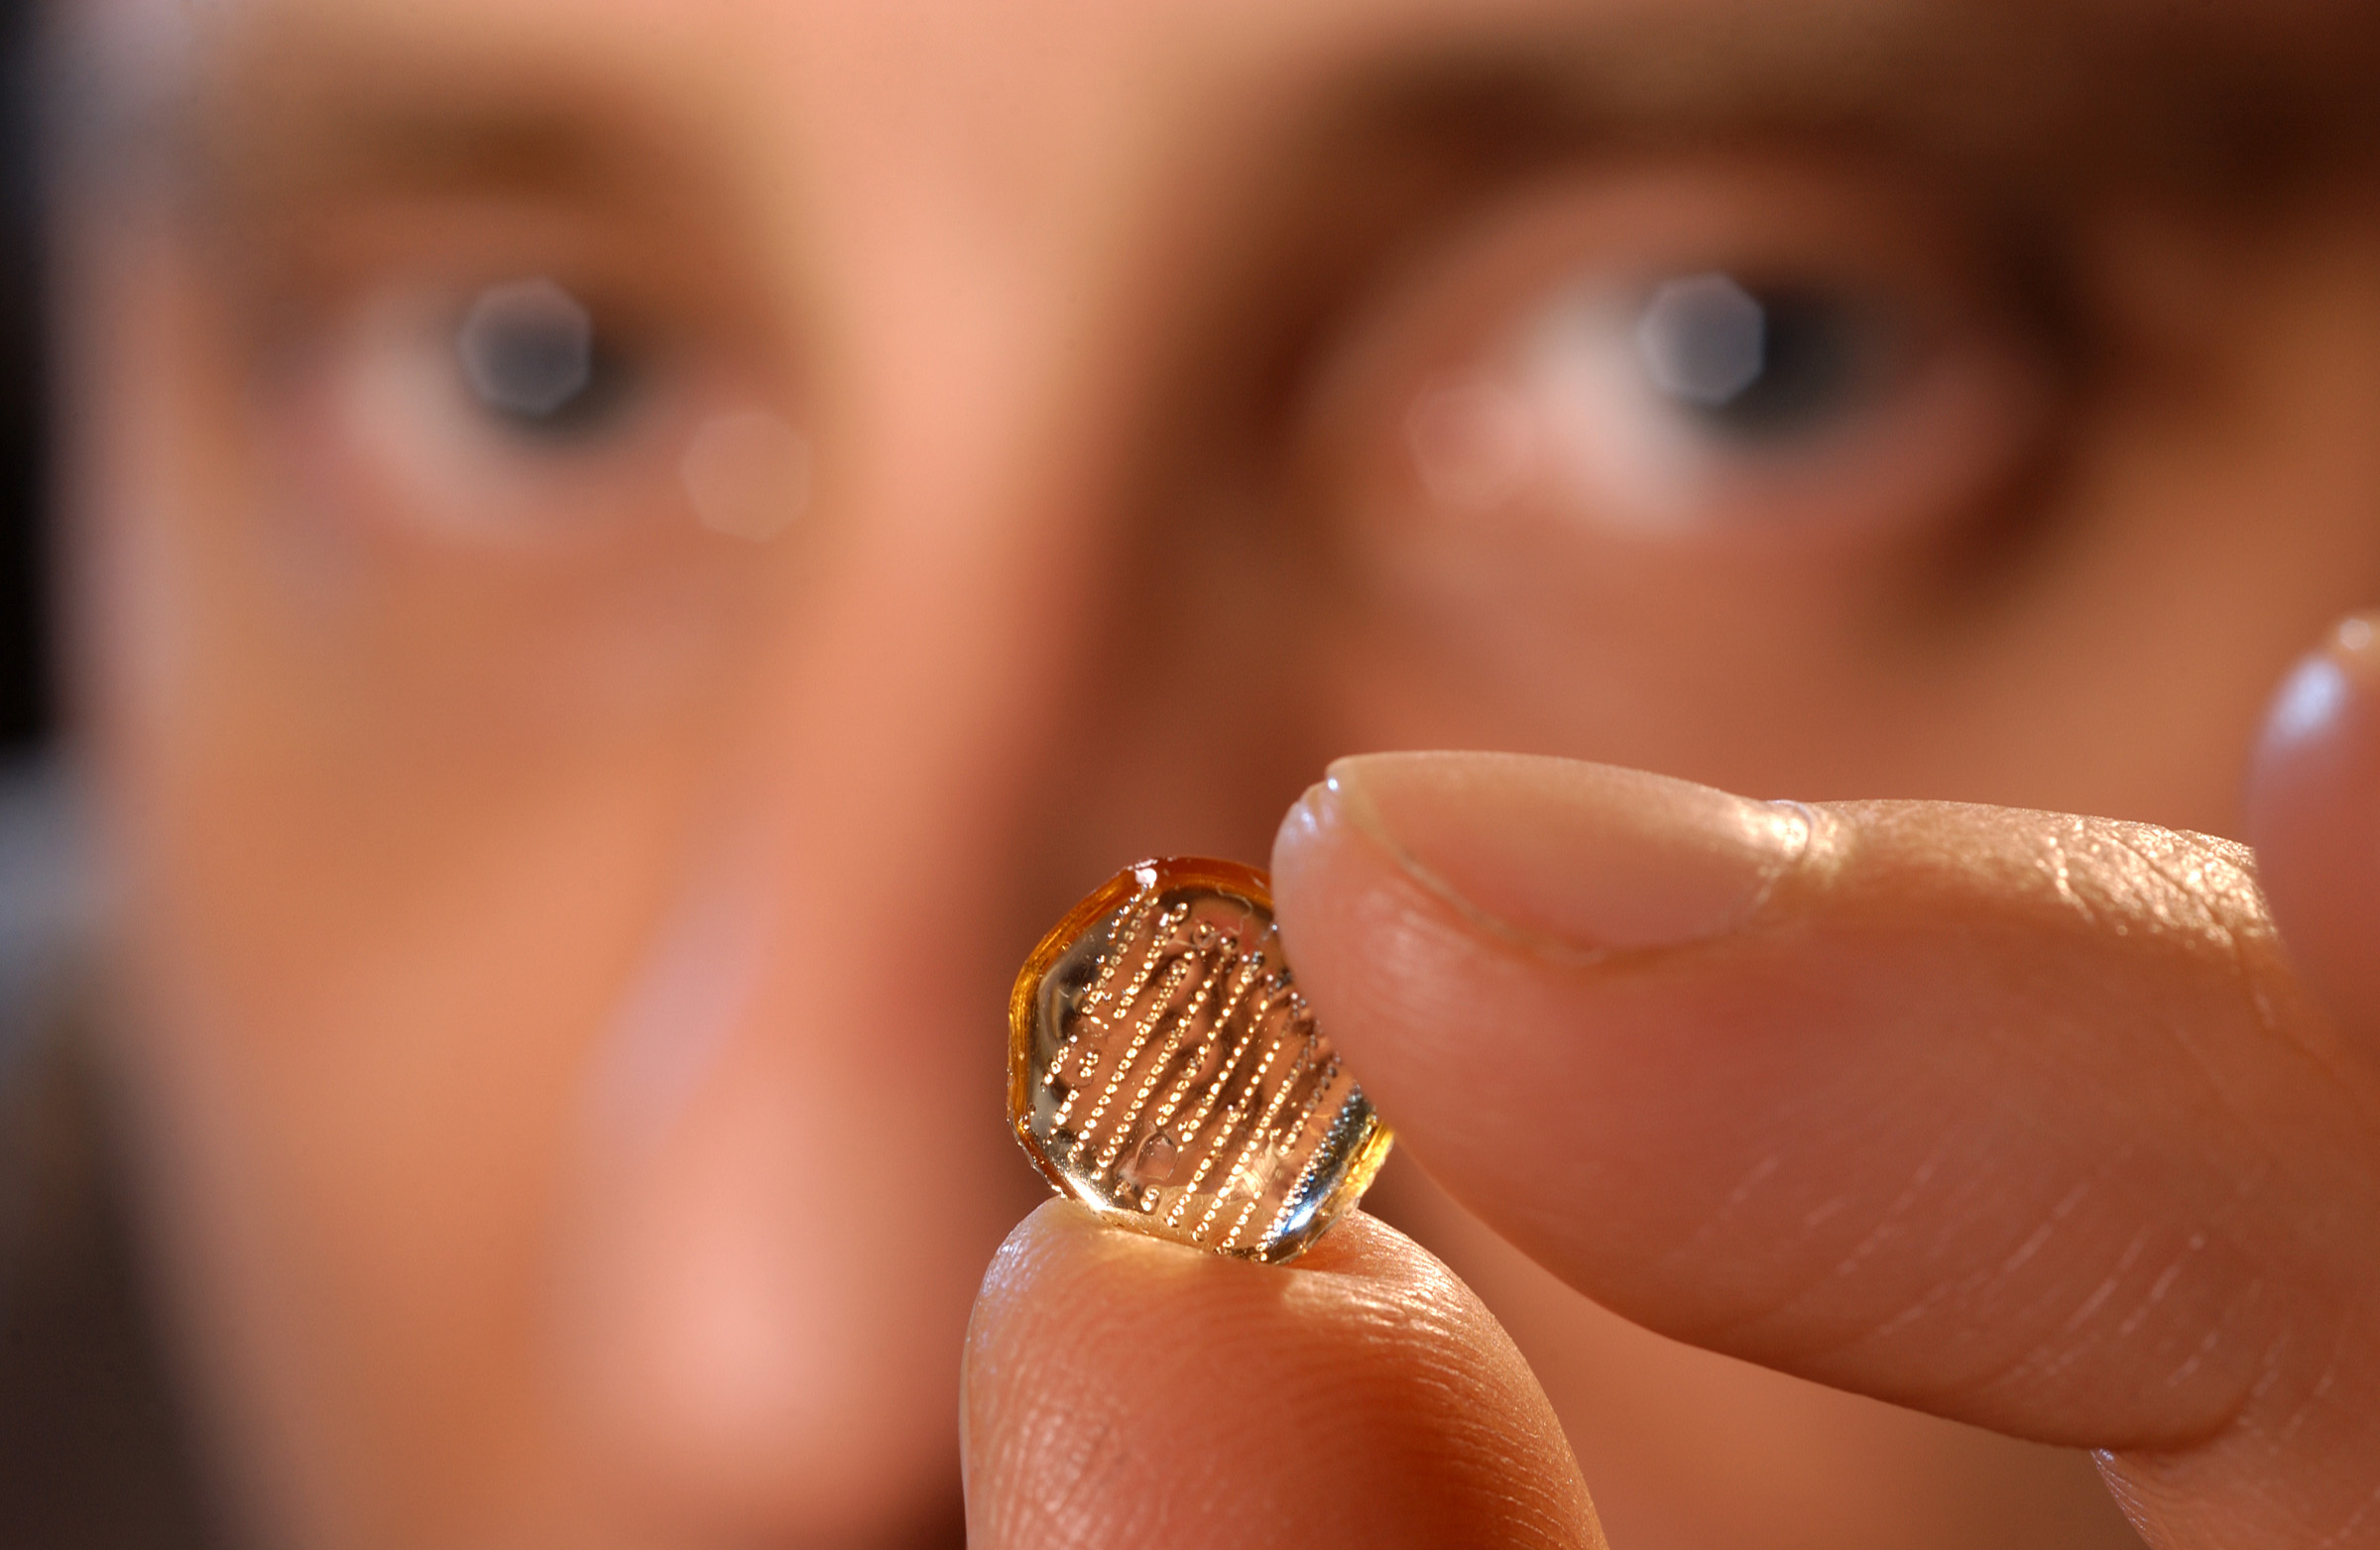 microneedle vaccine patch